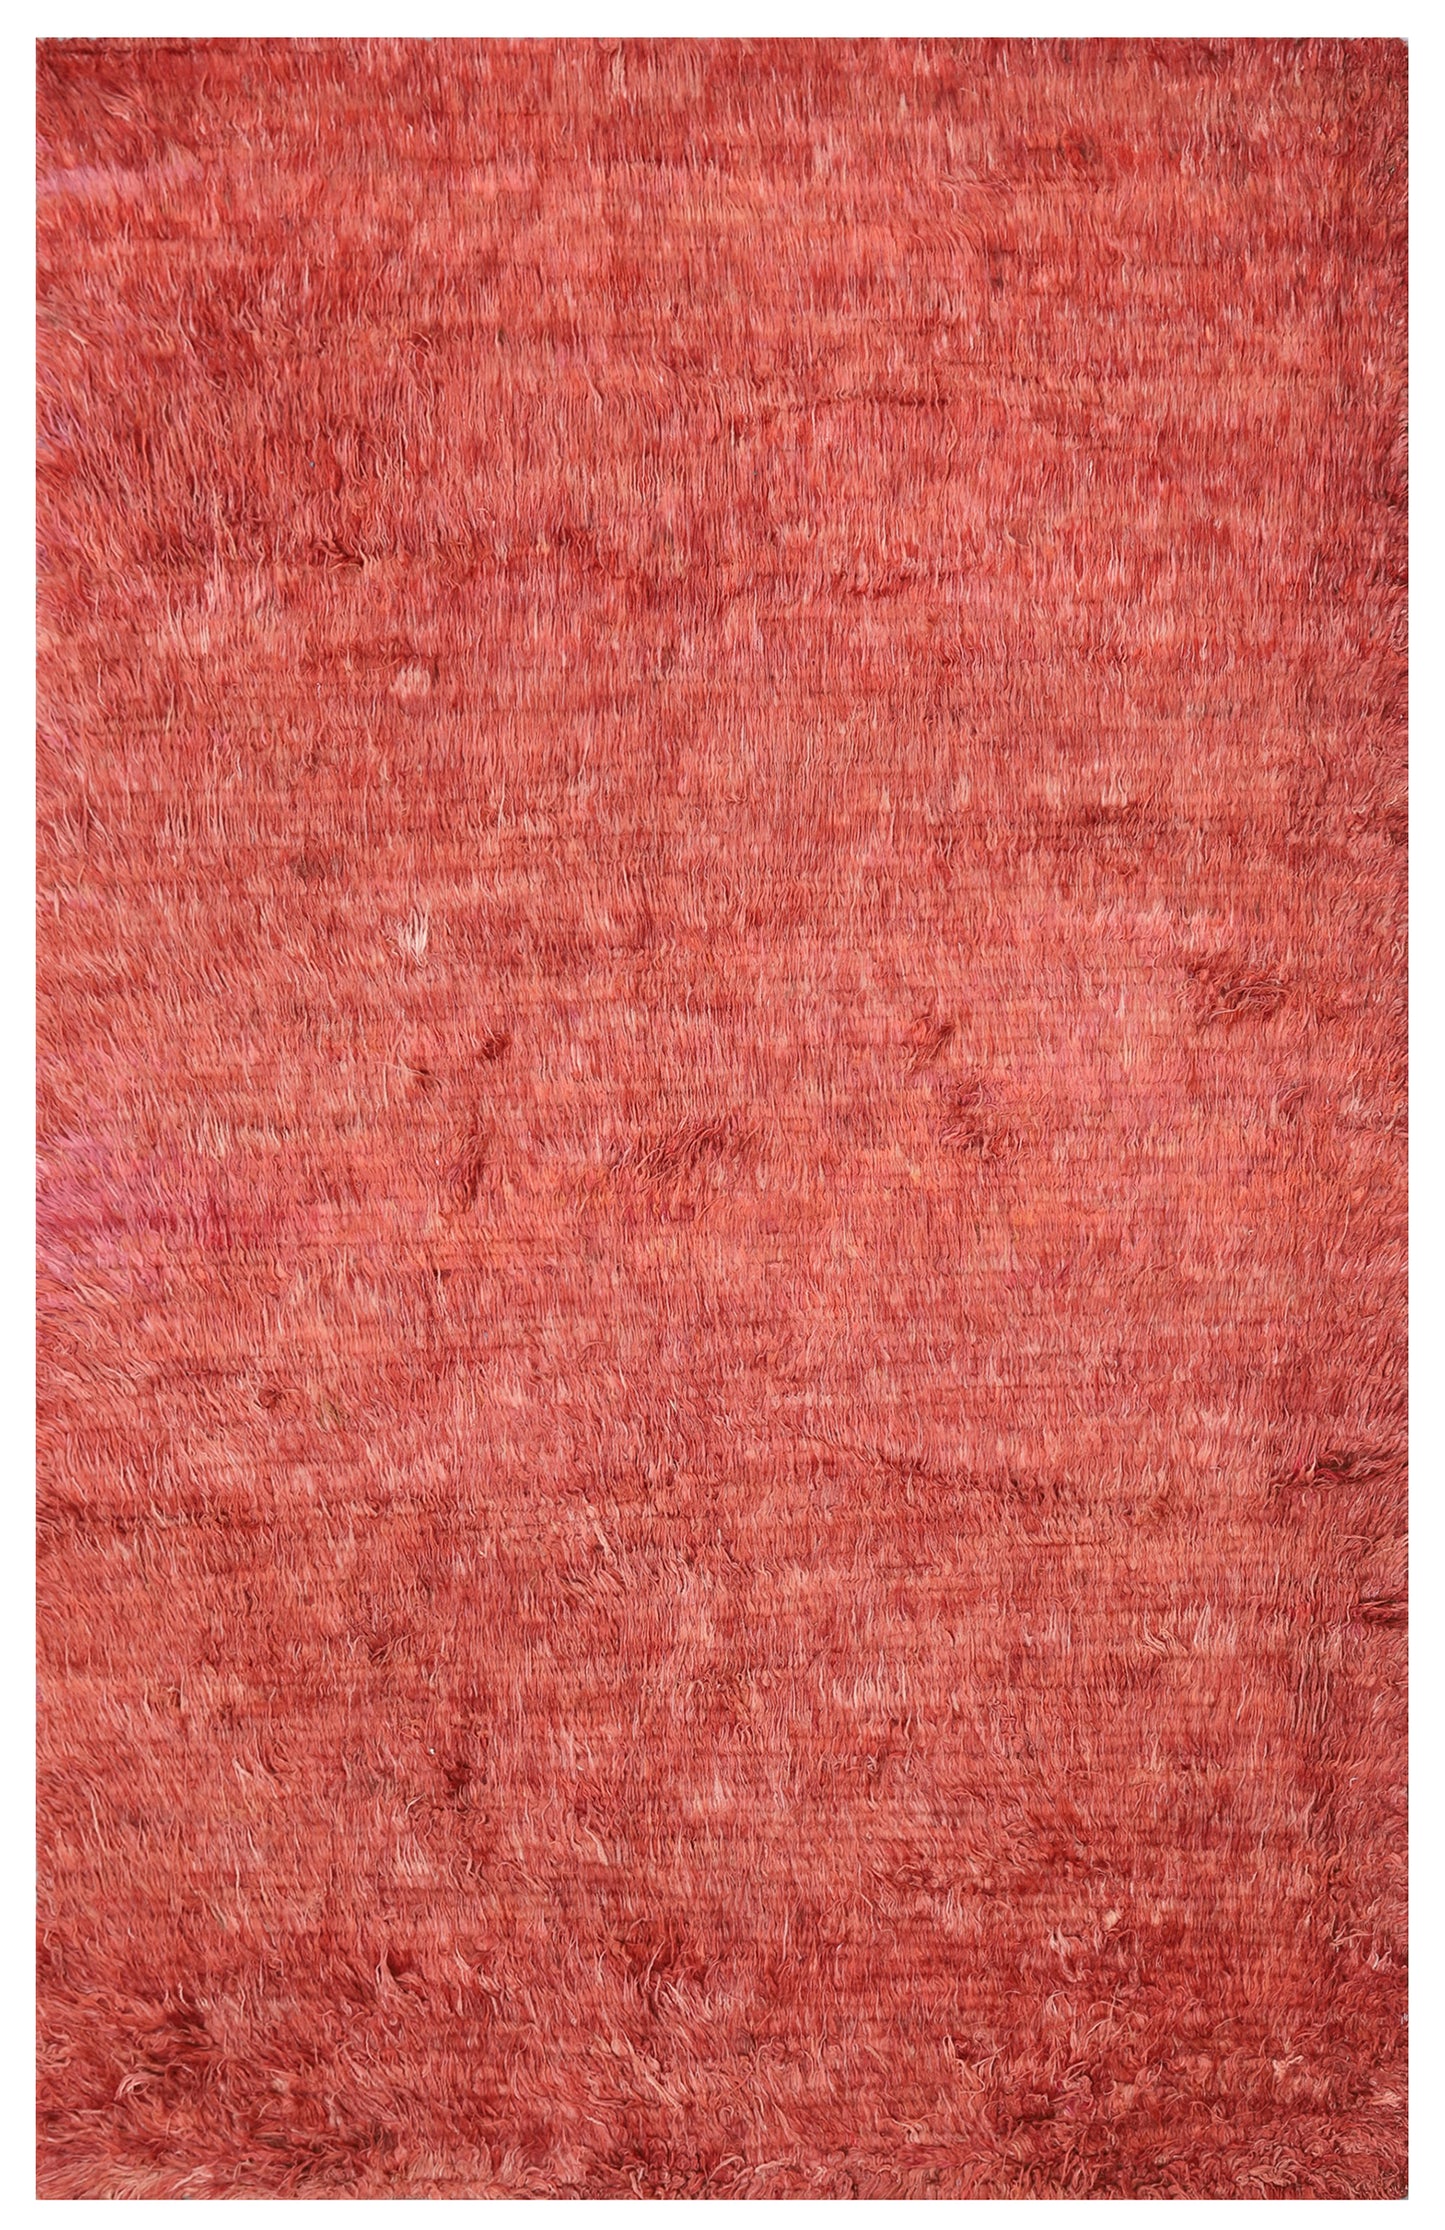 6'x9' Red Solid Plain Ariana Moroccan Style Shaggy Barchi Rug